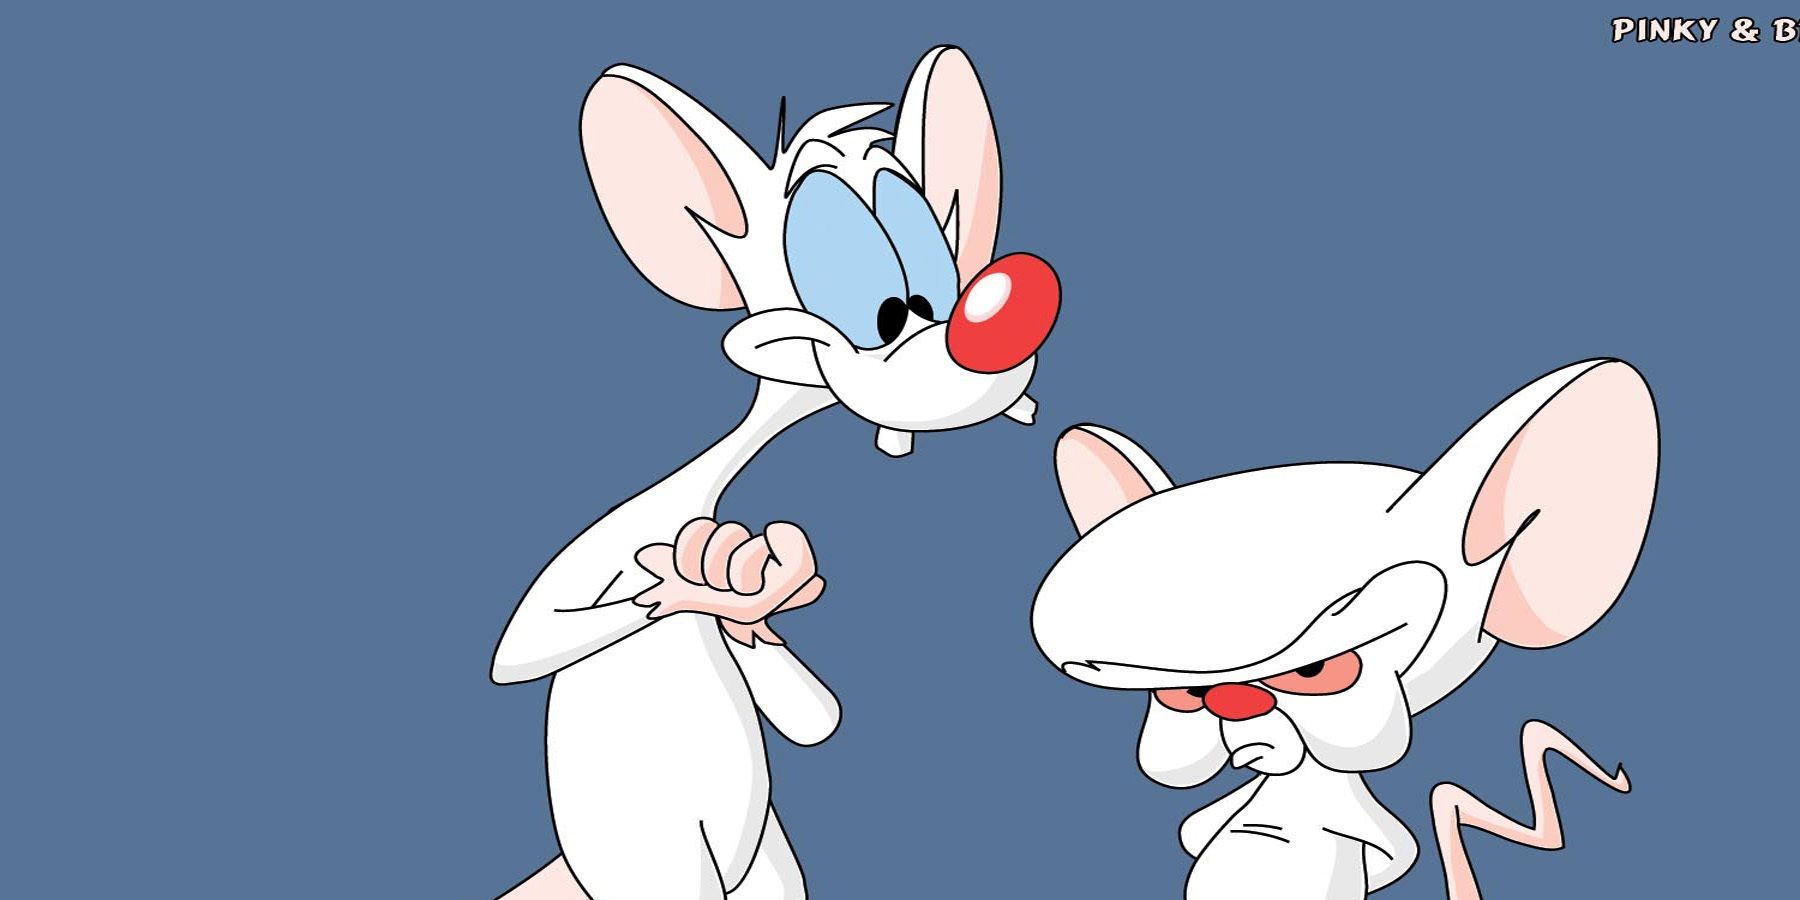 14 Pinky And The Brain.